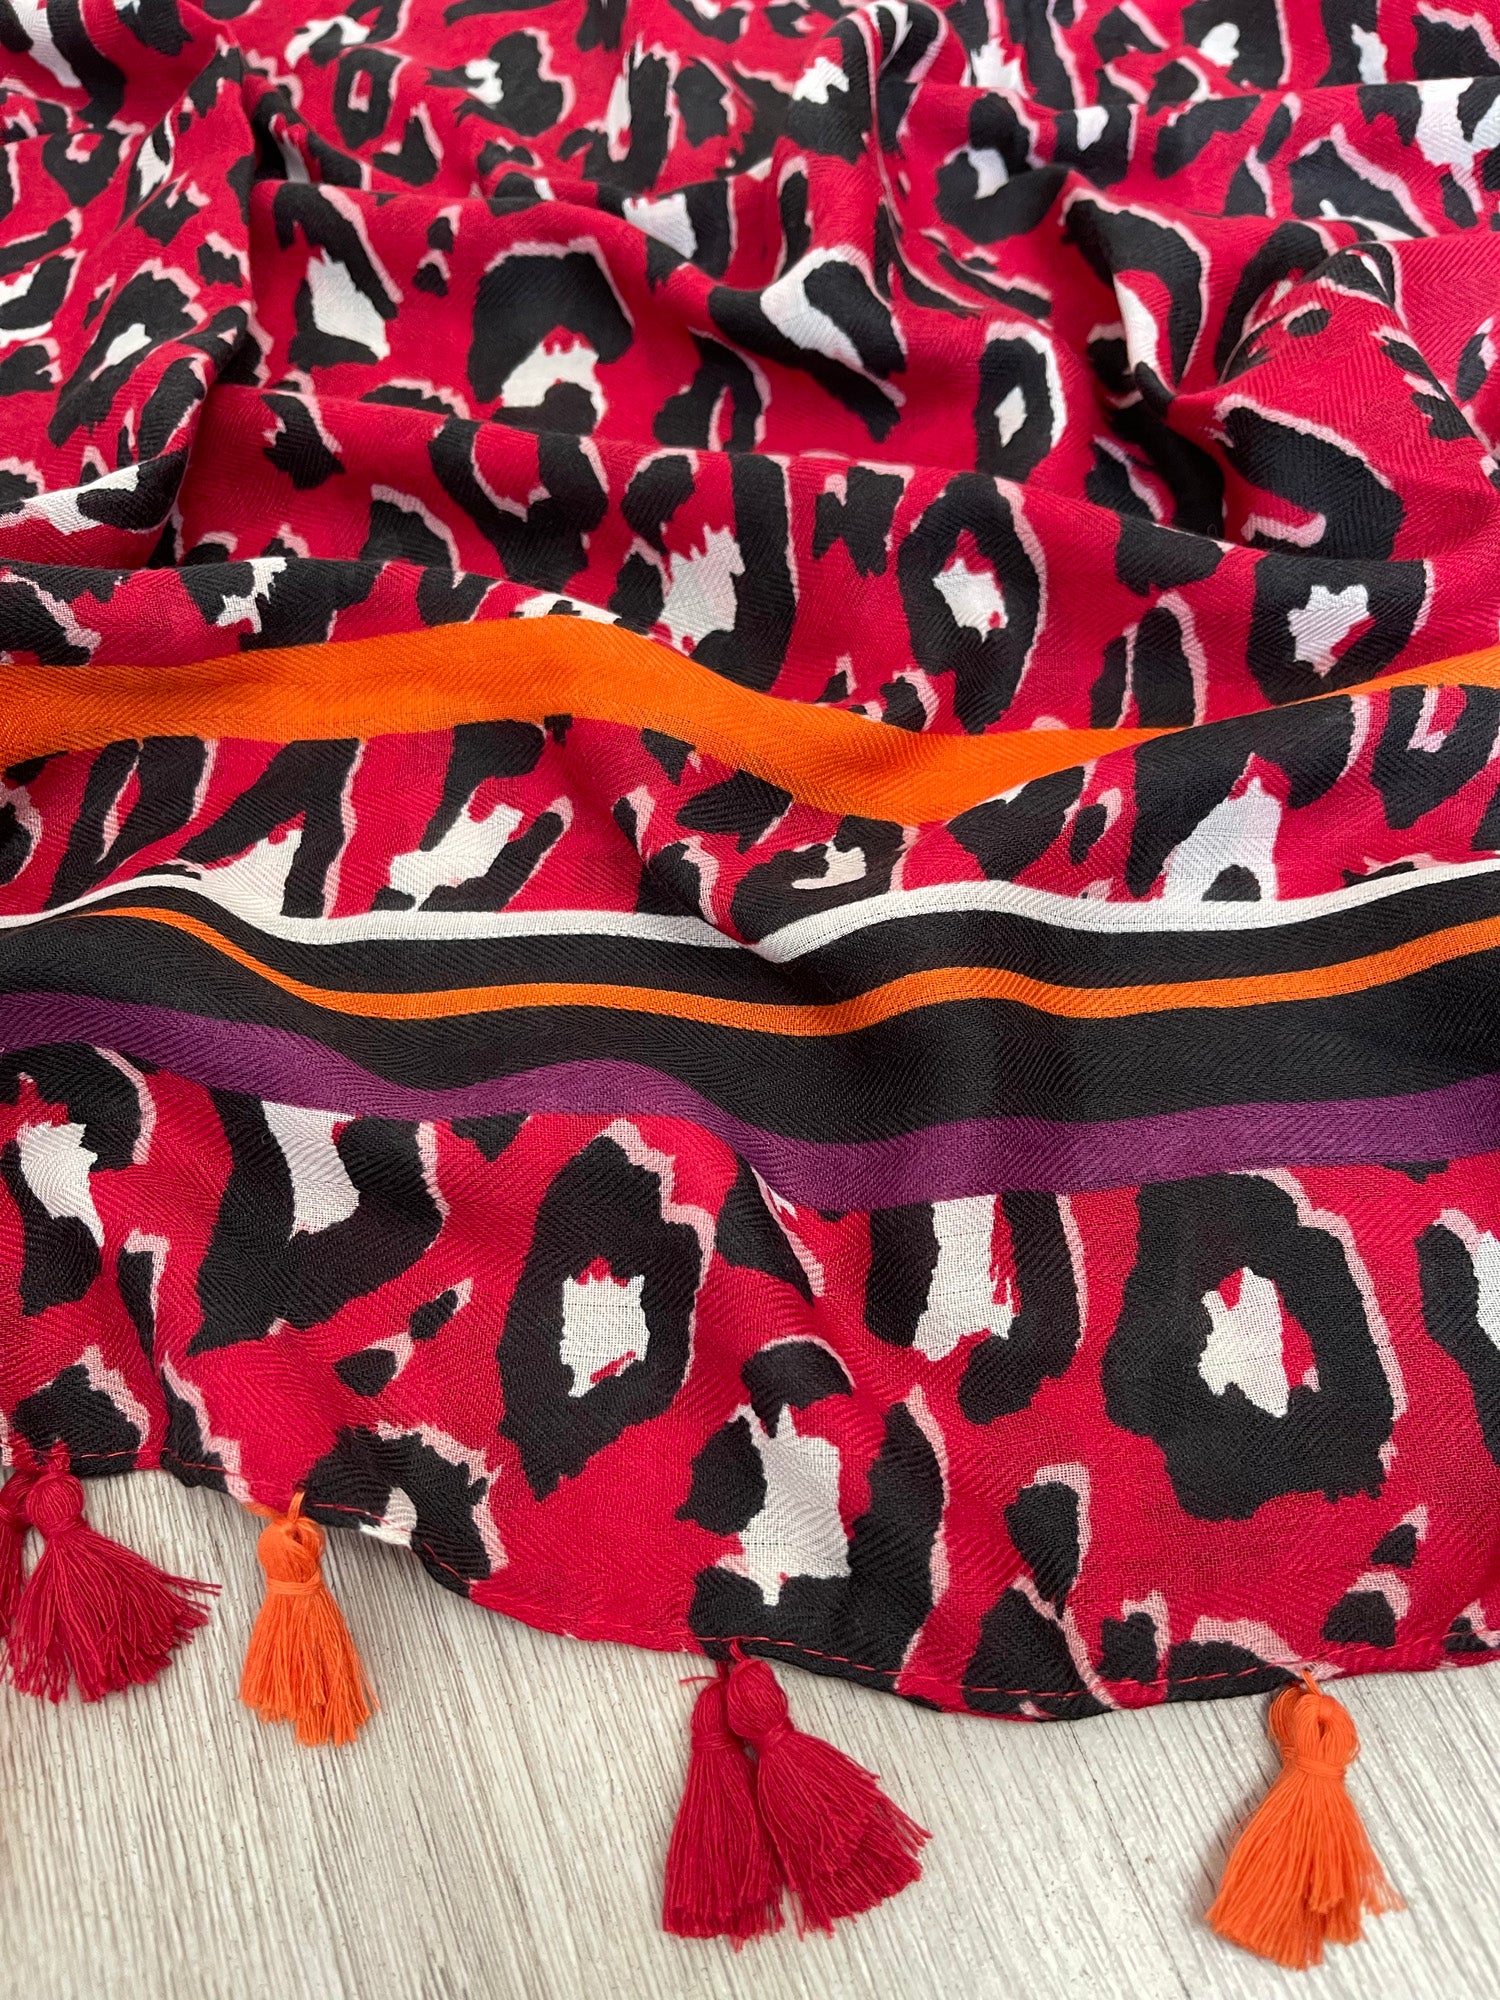 LARGE RED TRIBAL LEOPARD PRINT SCARF WITH TASSELS